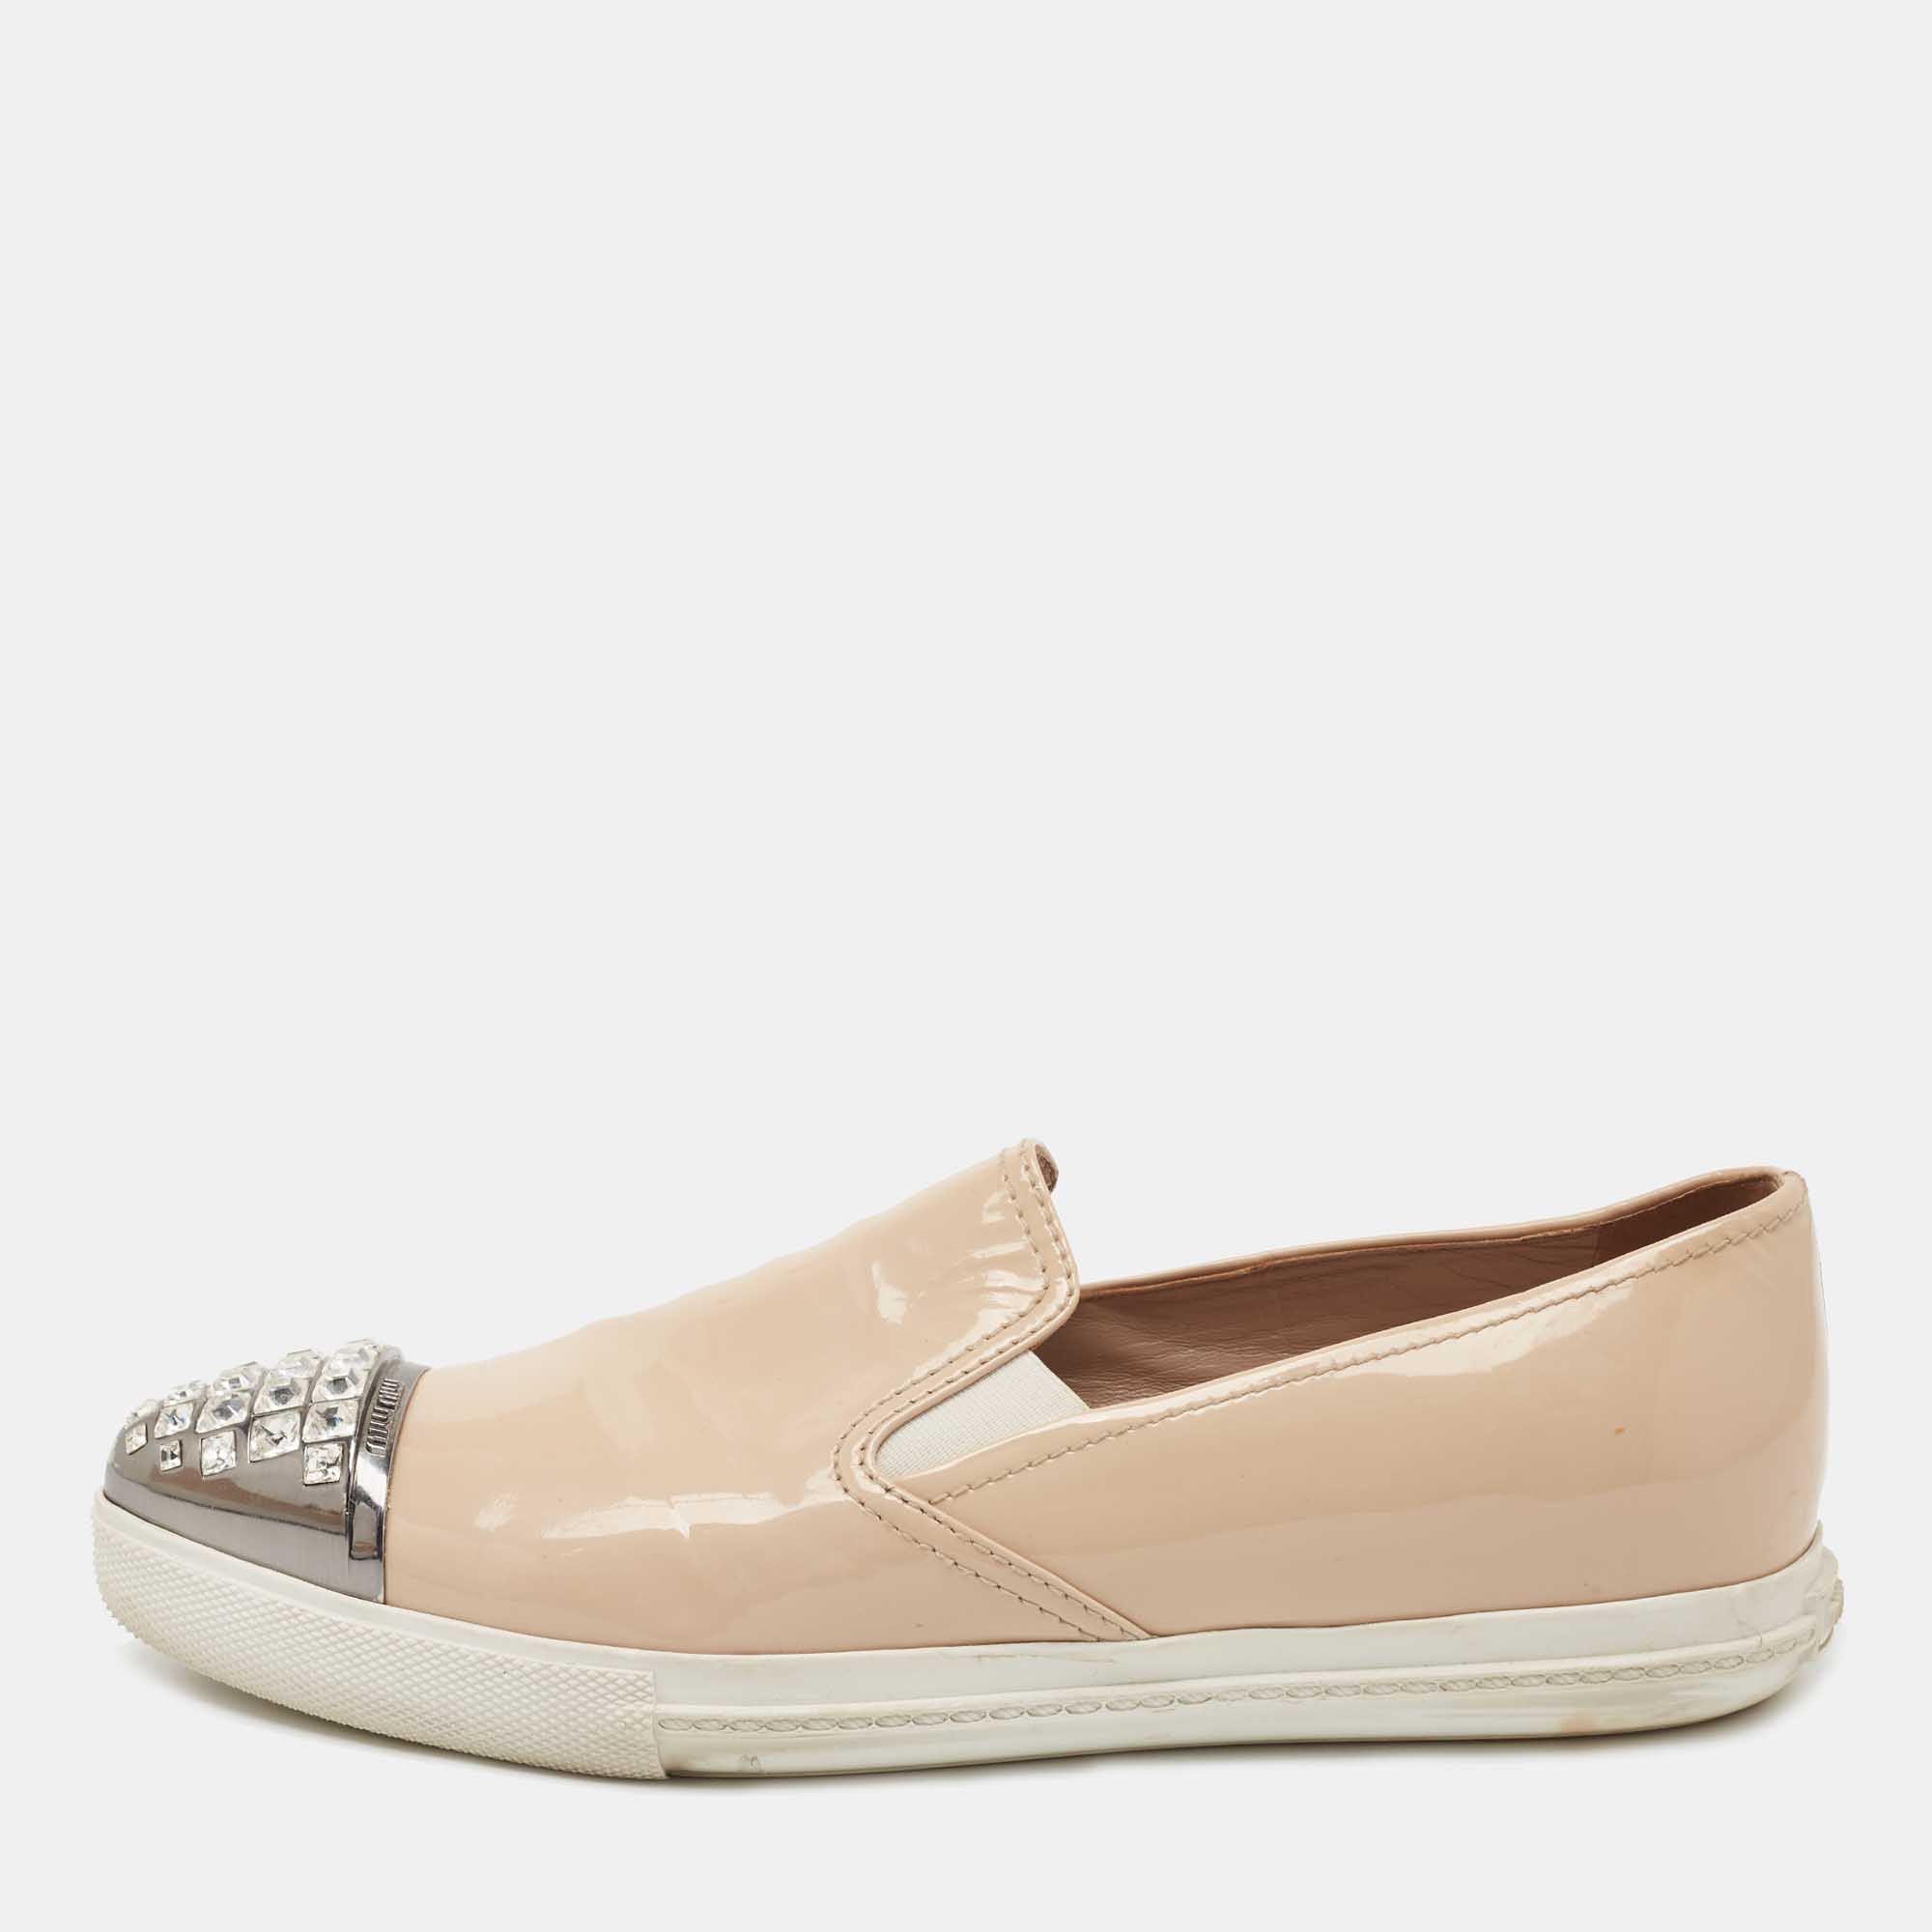 Miu miu beige patent leather crystal embellished sneakers size 38